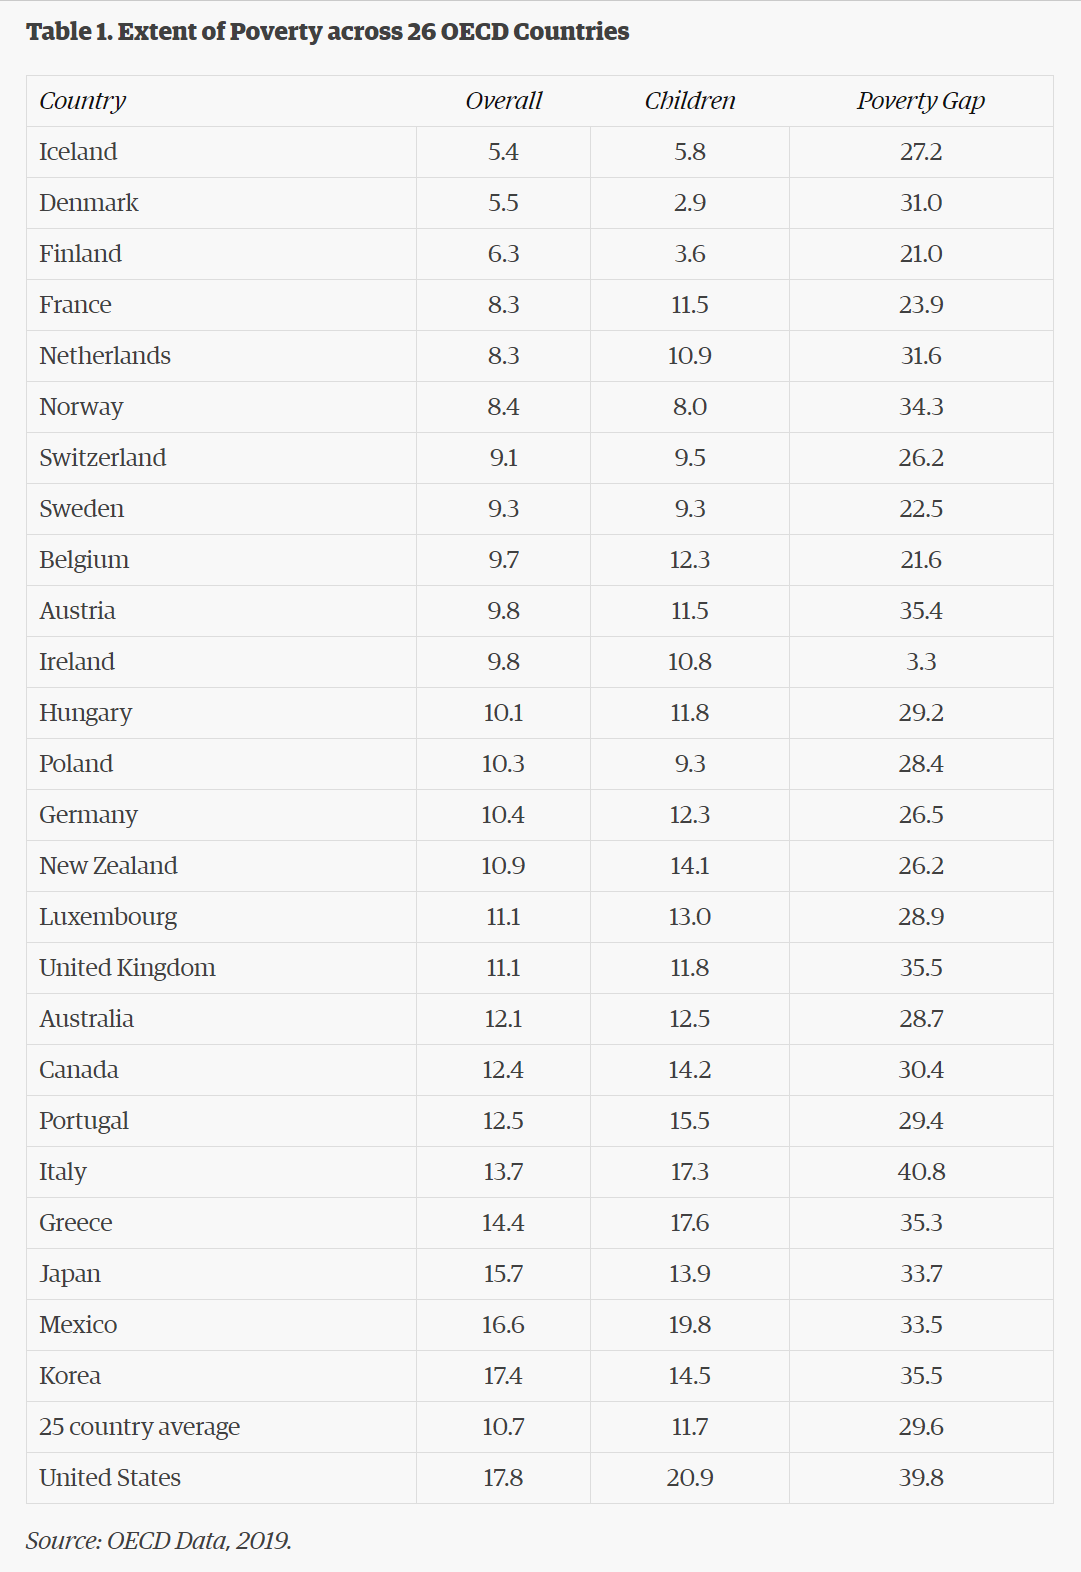 Table showing the extent of poverty across 26 OECD countries. The United States ranks last, with the worst poverty rate at 17.8 percent. Data: OECD, 2019. Graphic: 
ConfrontingPoverty.org